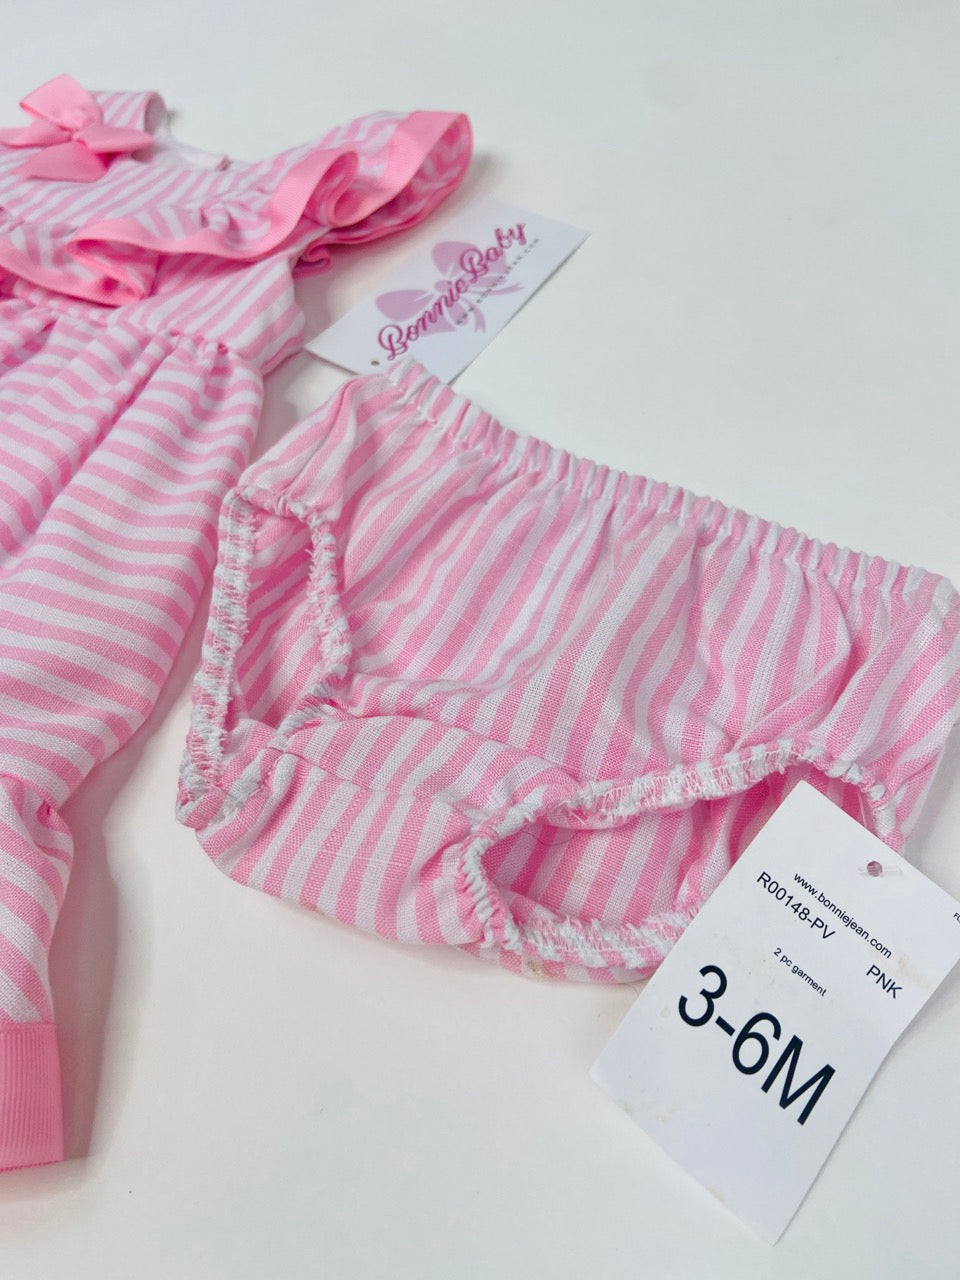 Pink Striped Spring Dress with Bloomers- NWT - 3/6 Month